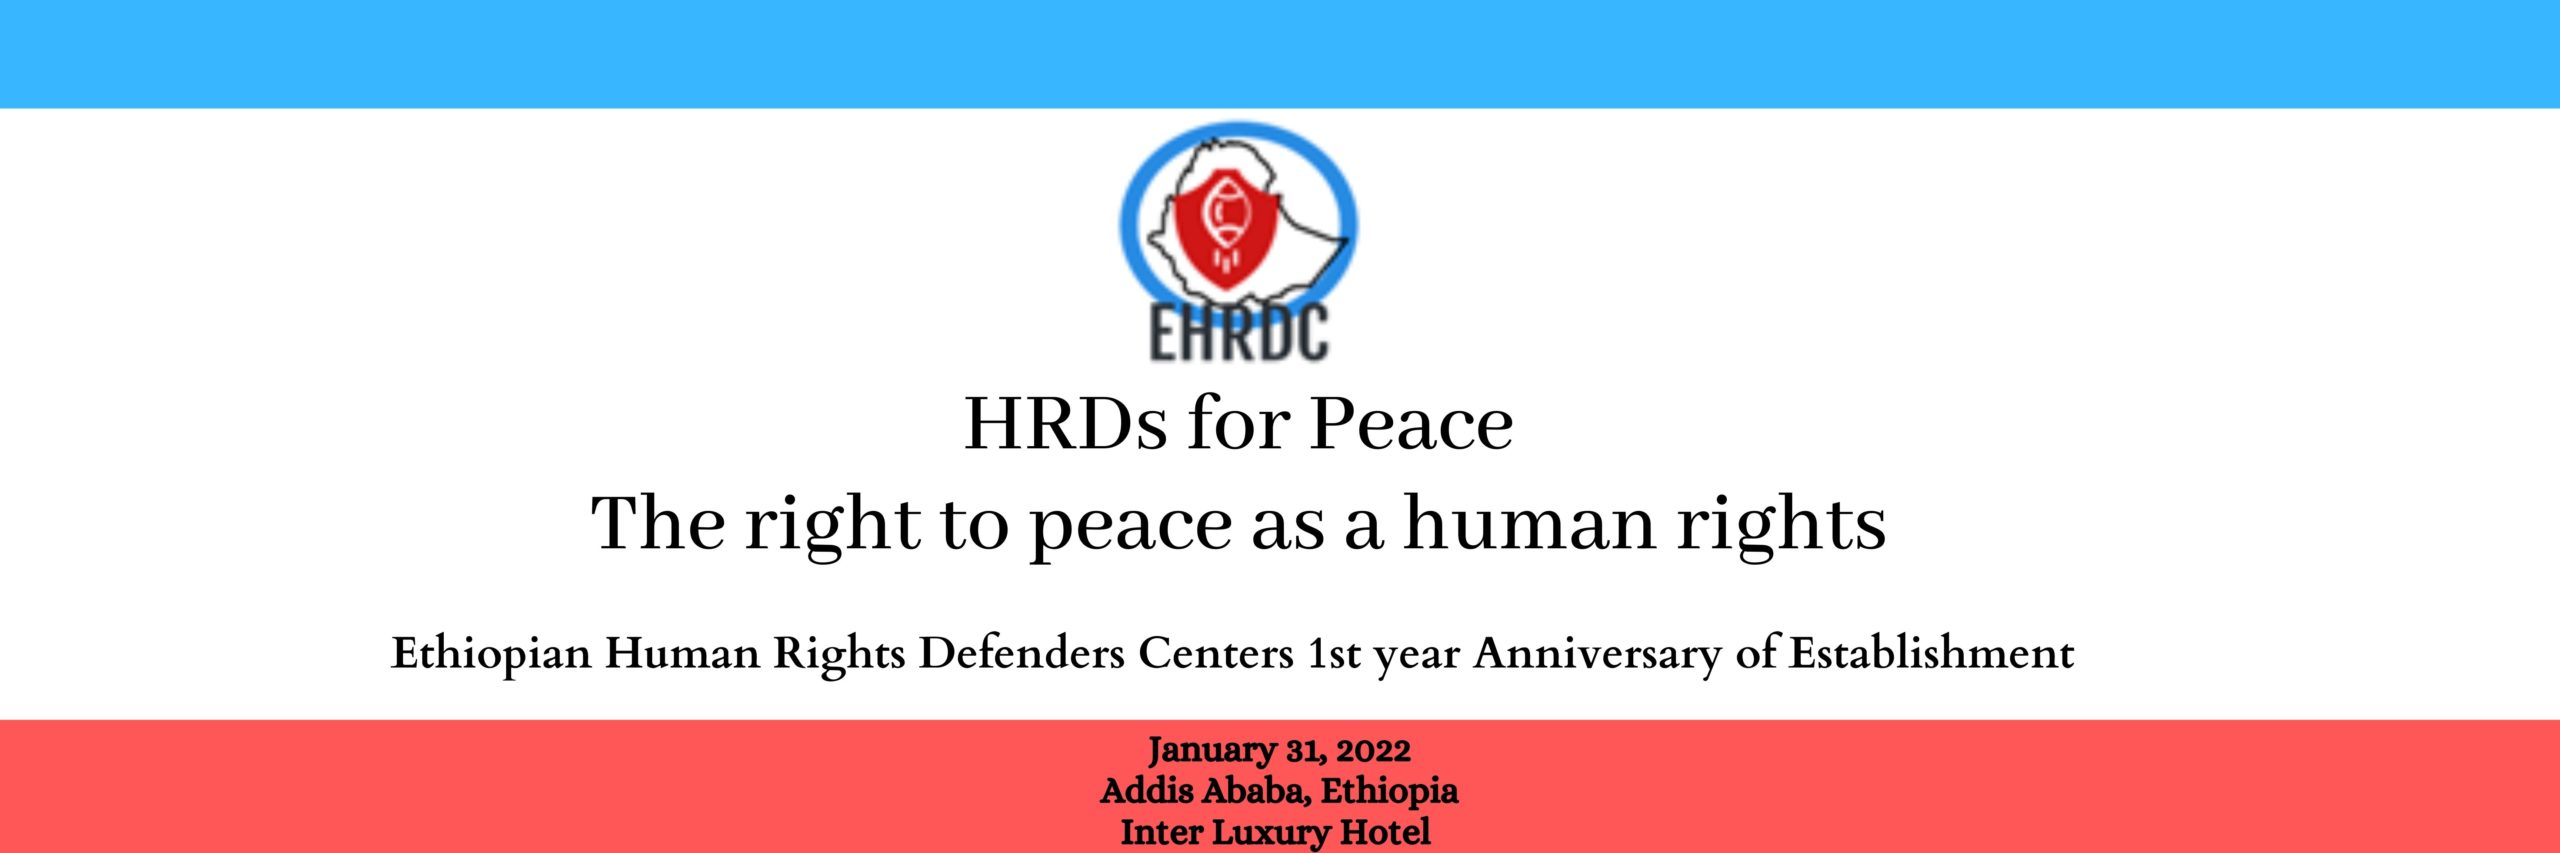 Ethiopian Human Rights Defenders Center will be celebrating its 1st Year of establishment on January 31, 2021